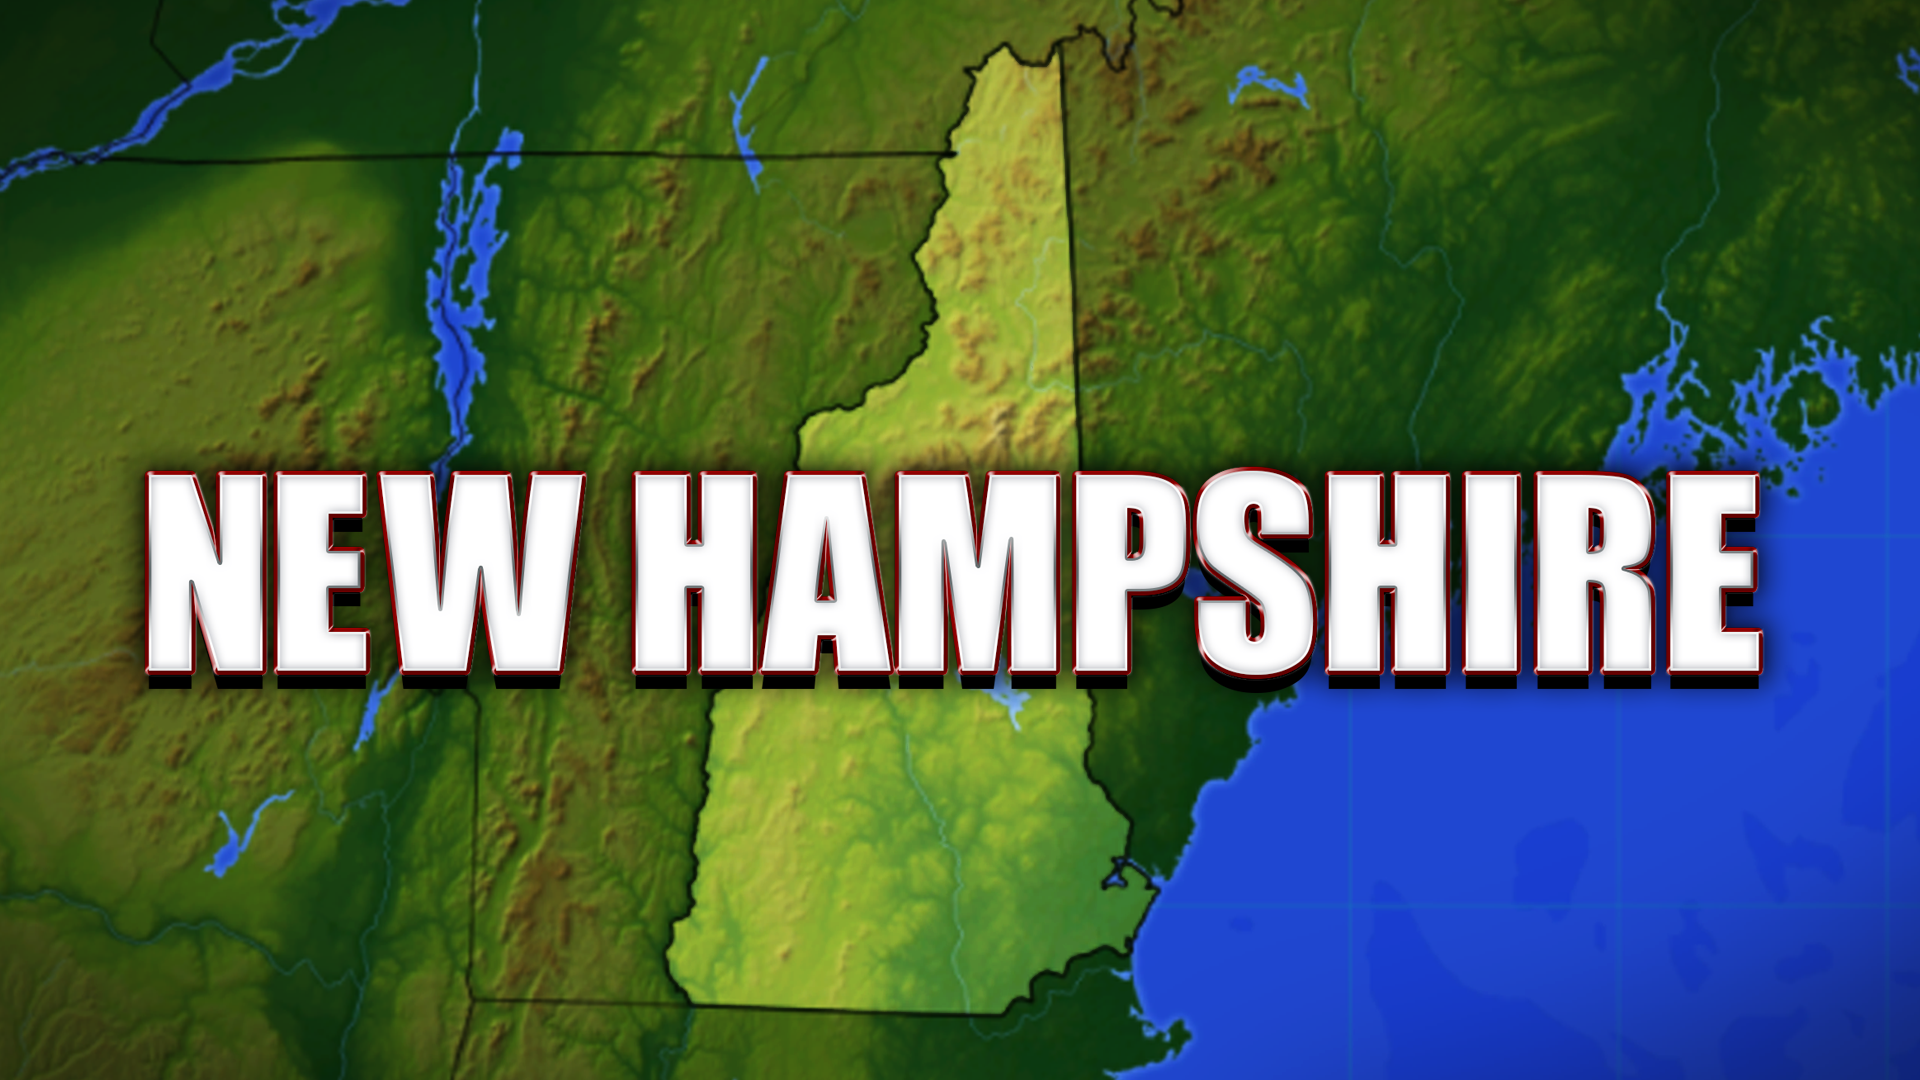 Police investigating possible drowning in Hillsborough, NH - Boston ...